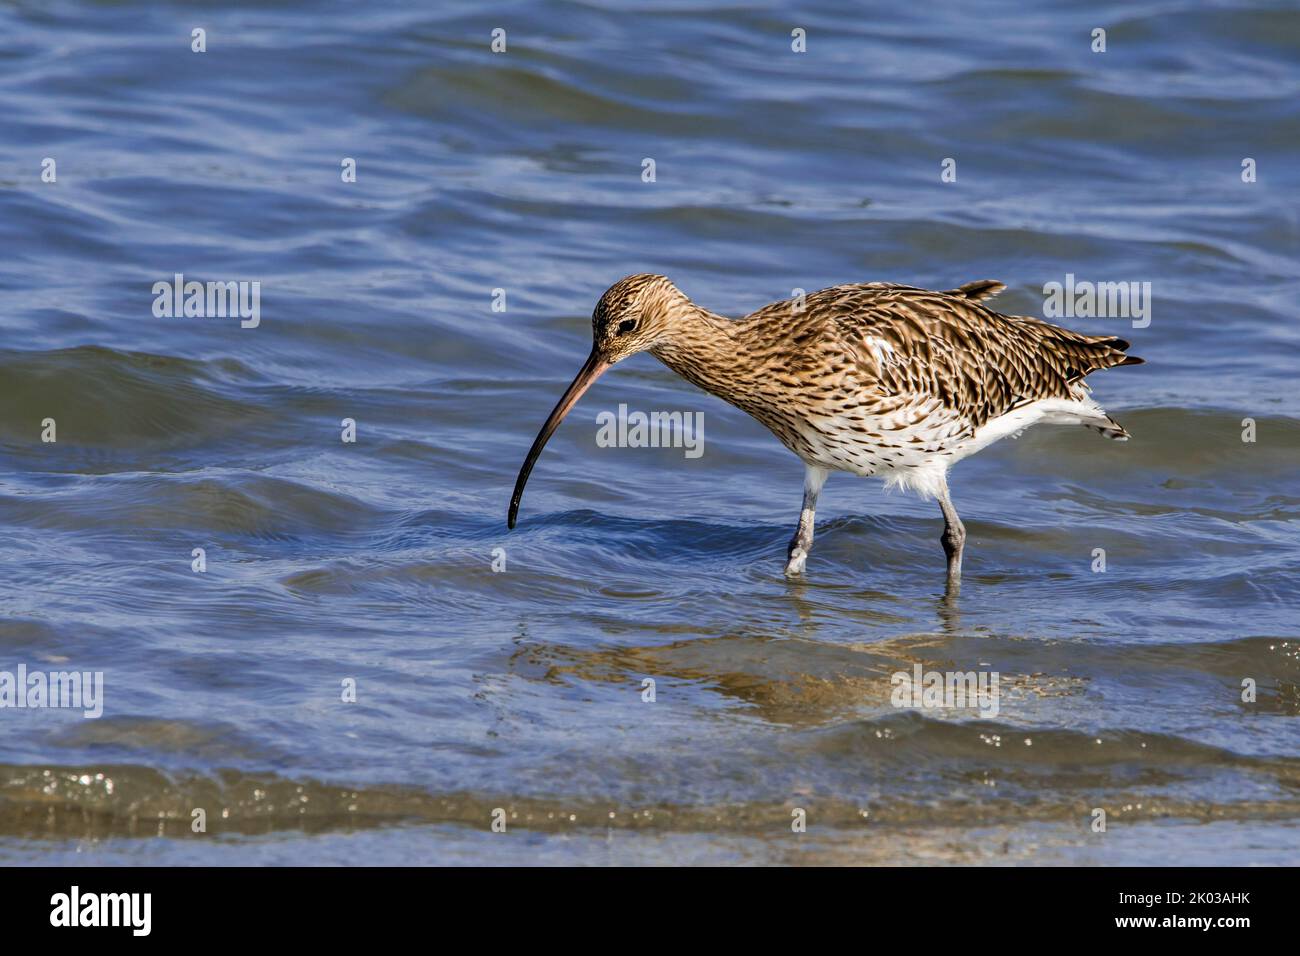 Eurasian curlew / common curlew (Numenius arquata) foraging in shallow water at mudflat / saltmarsh along the North Sea coast in late summer Stock Photo